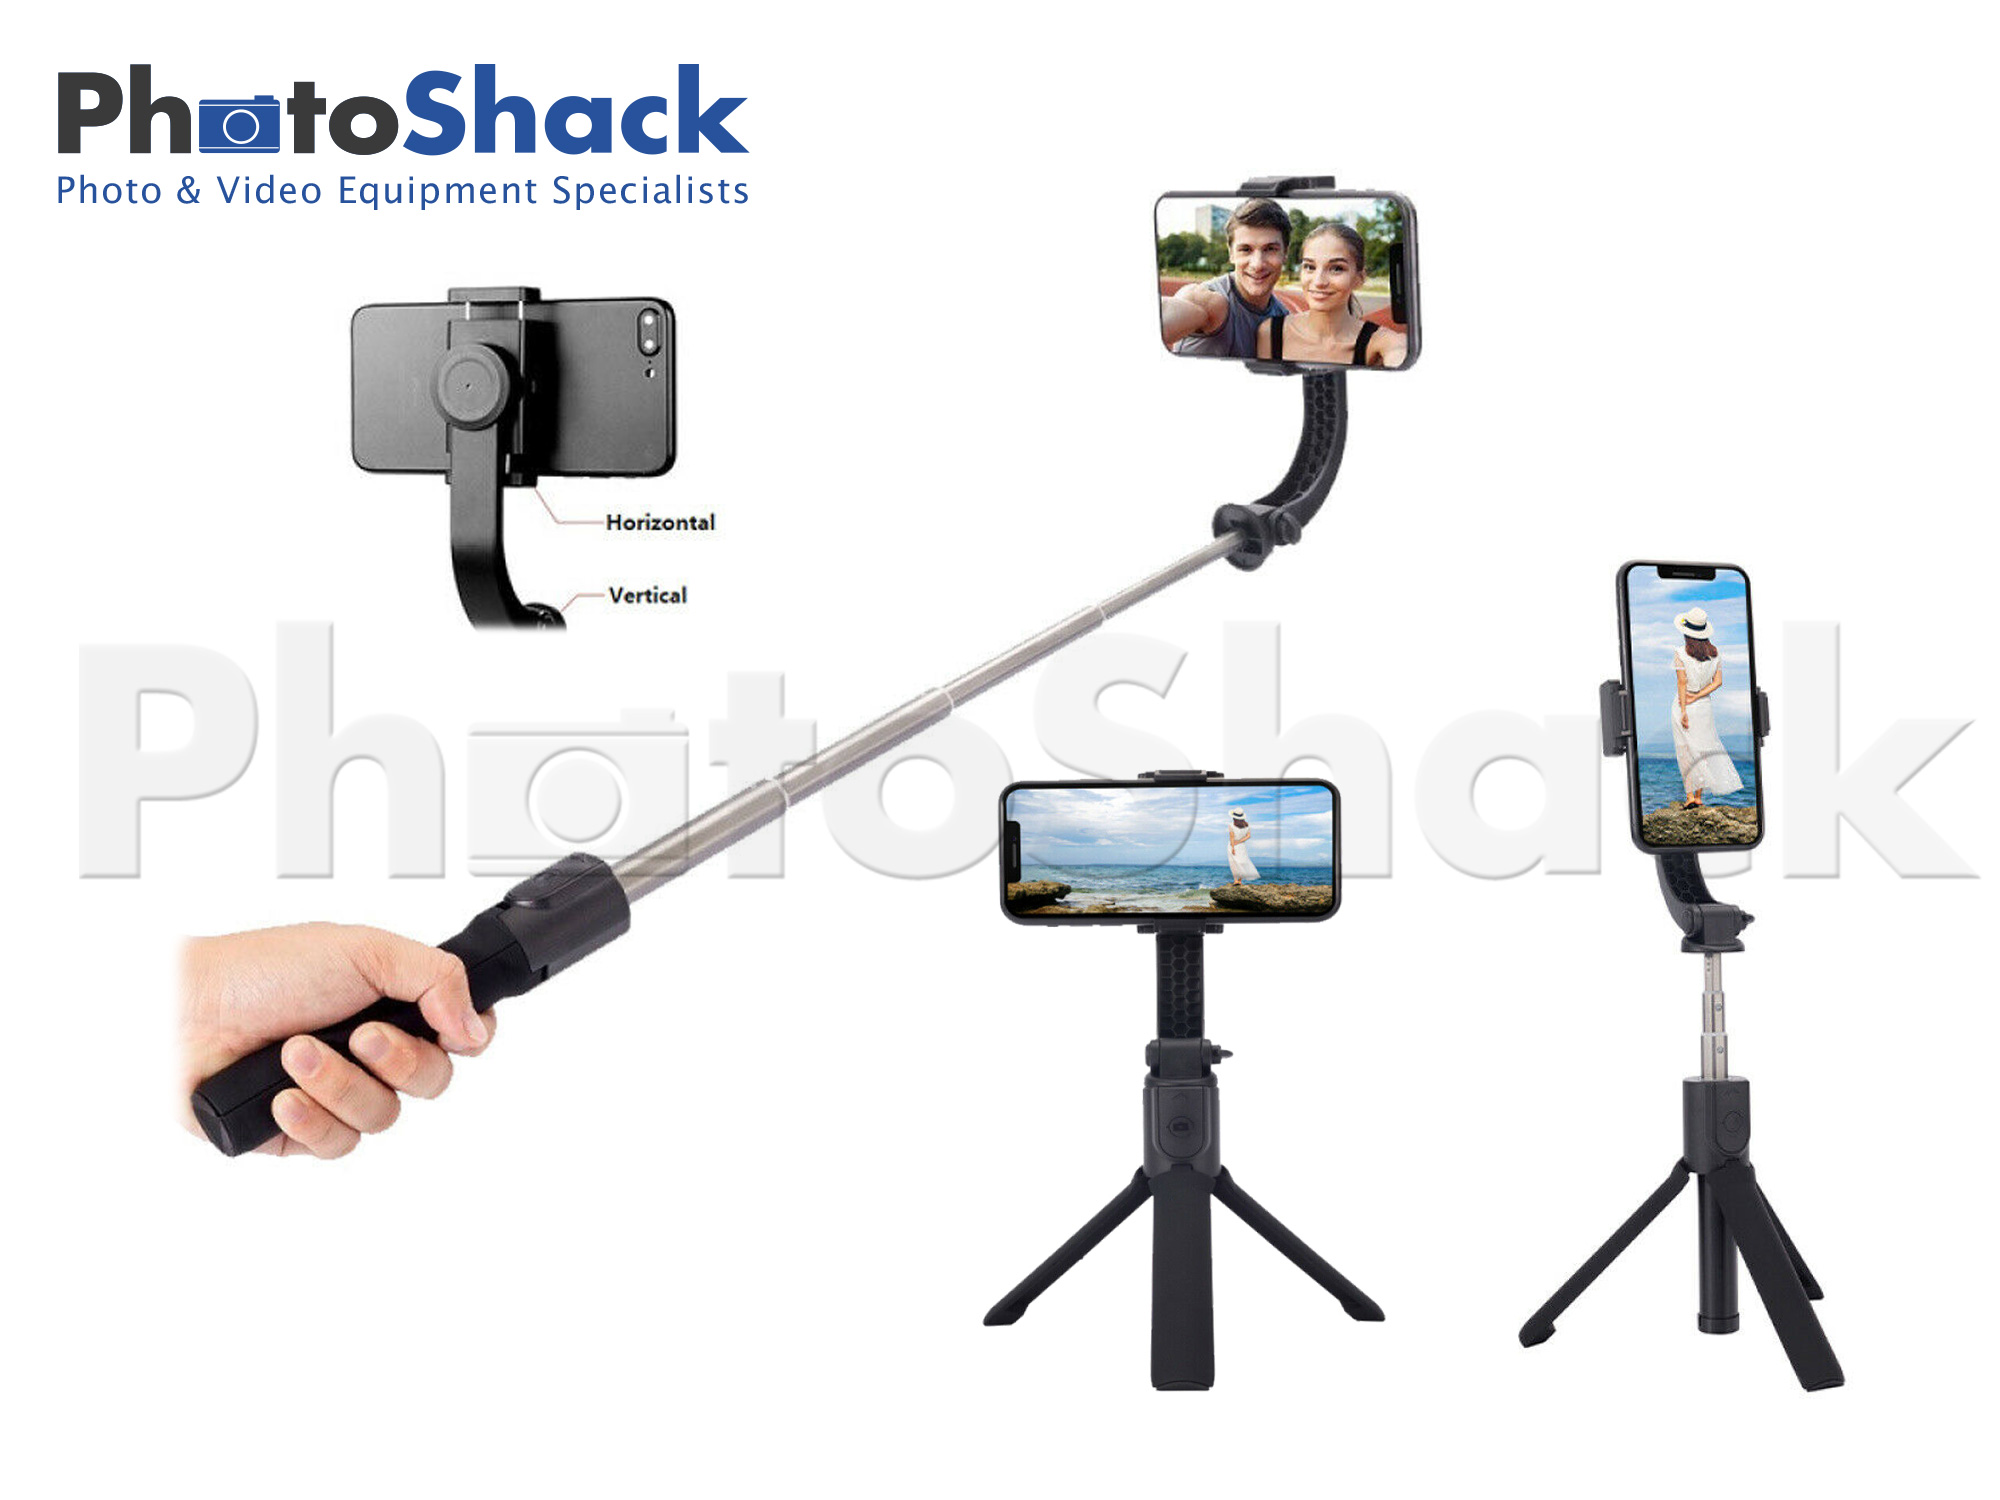 All-in-One Smartphone Tripod, Gimbal & Selfie Stick